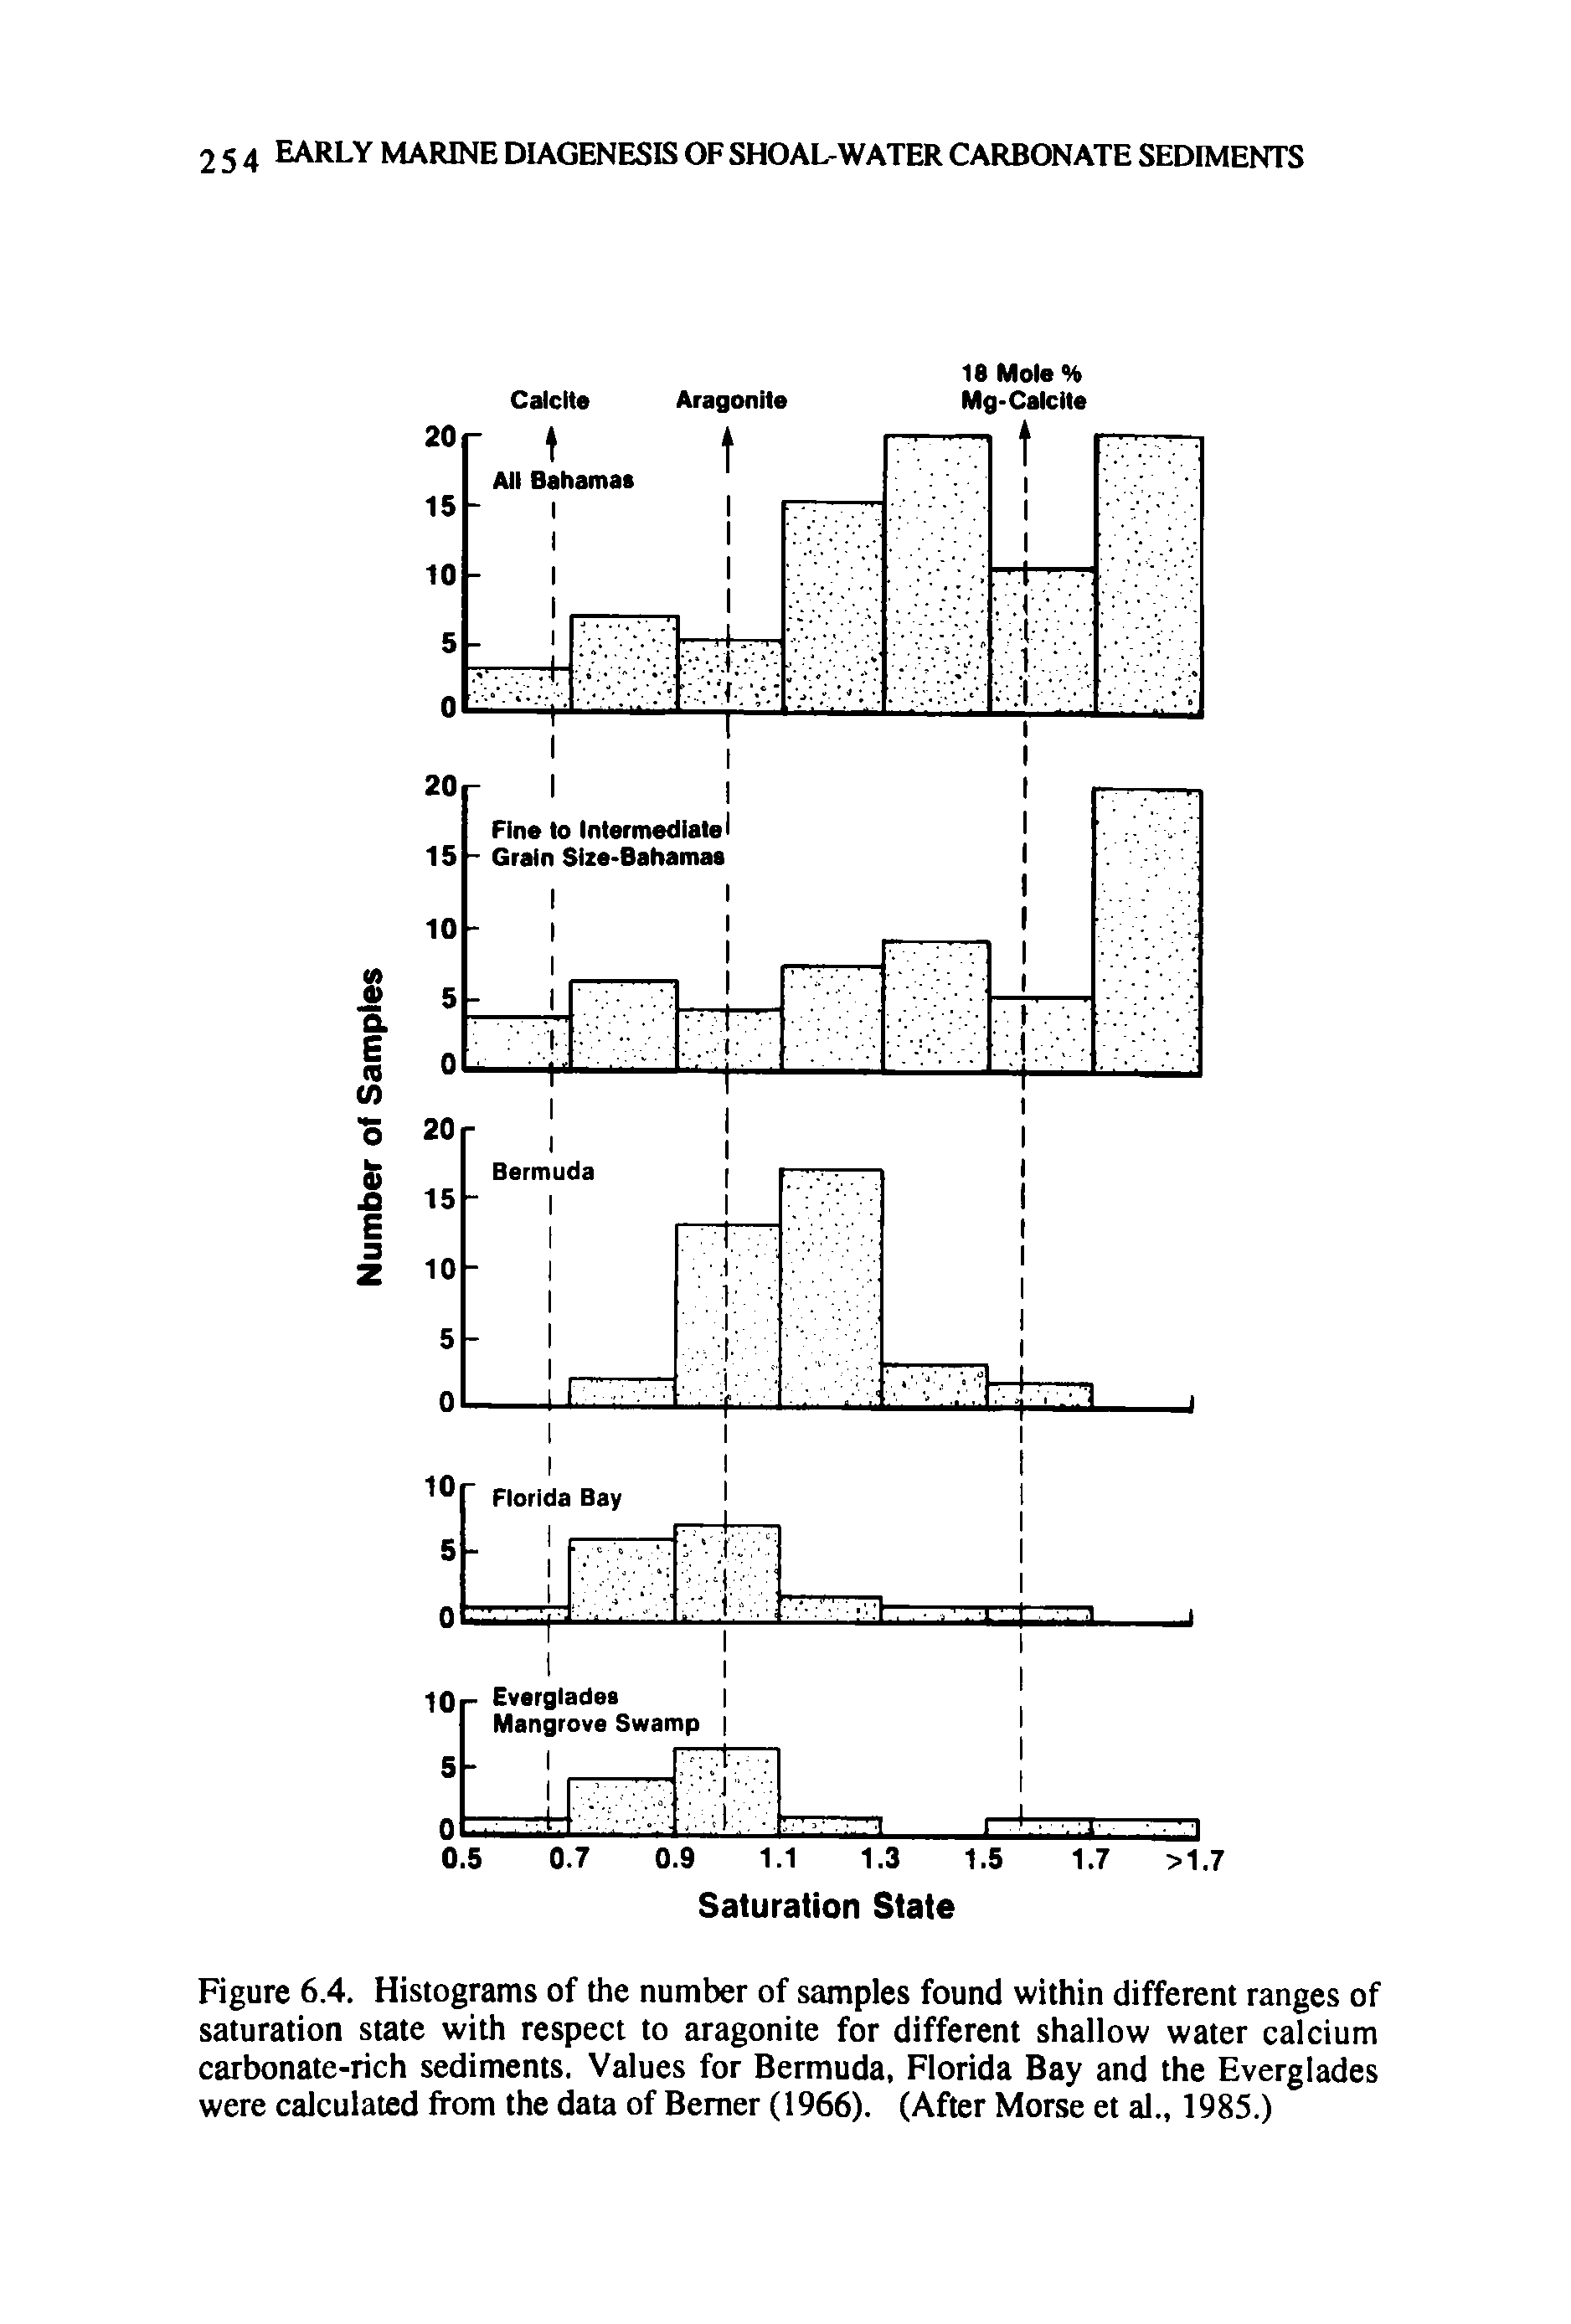 Figure 6.4. Histograms of the number of samples found within different ranges of saturation state with respect to aragonite for different shallow water calcium carbonate-rich sediments. Values for Bermuda, Florida Bay and the Everglades were calculated from the data of Berner (1966). (After Morse et al., 1985.)...